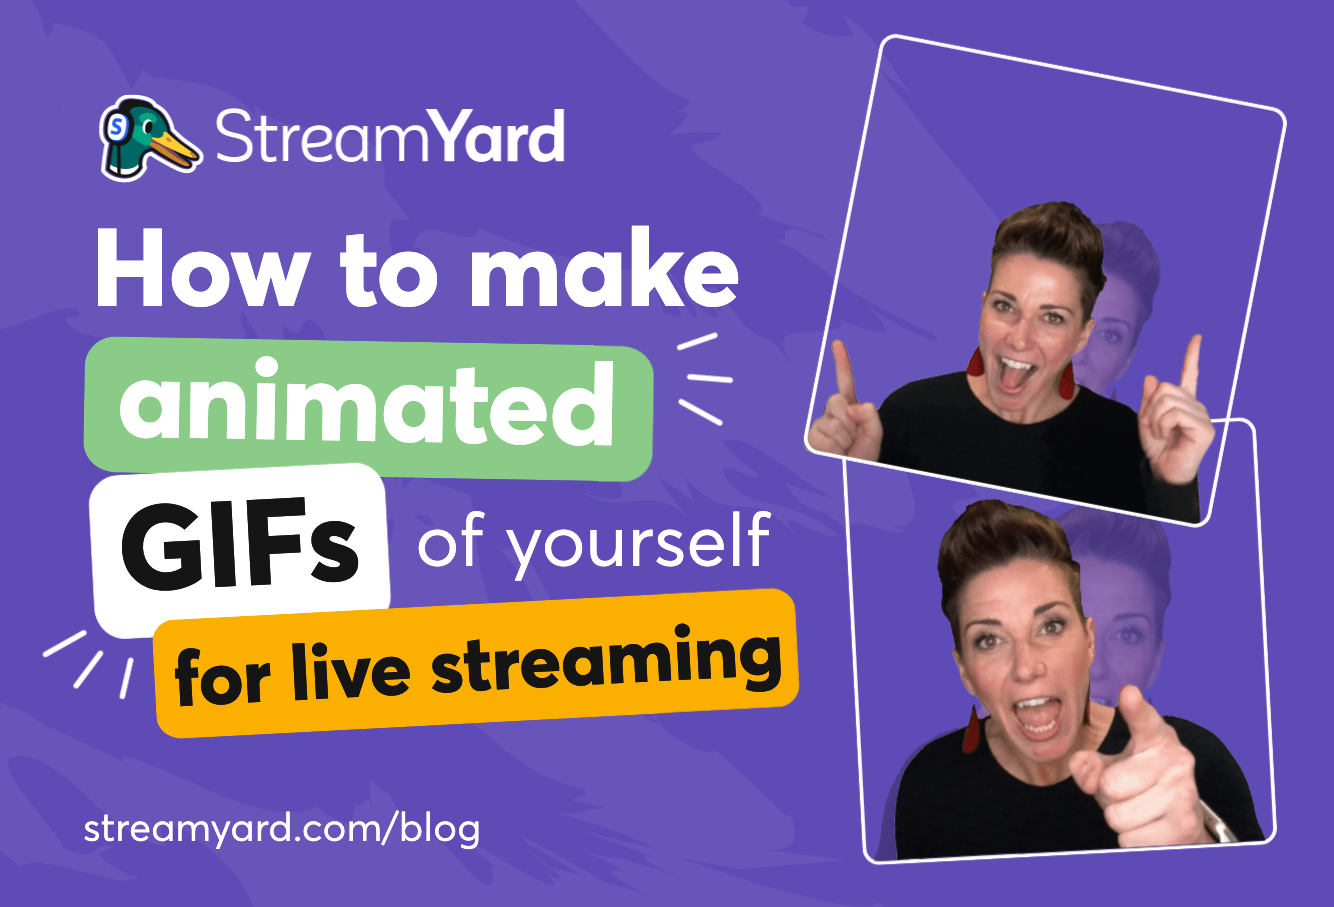 3 Ways to Make 3D GIFs – Here is Guide to Make Live Animations